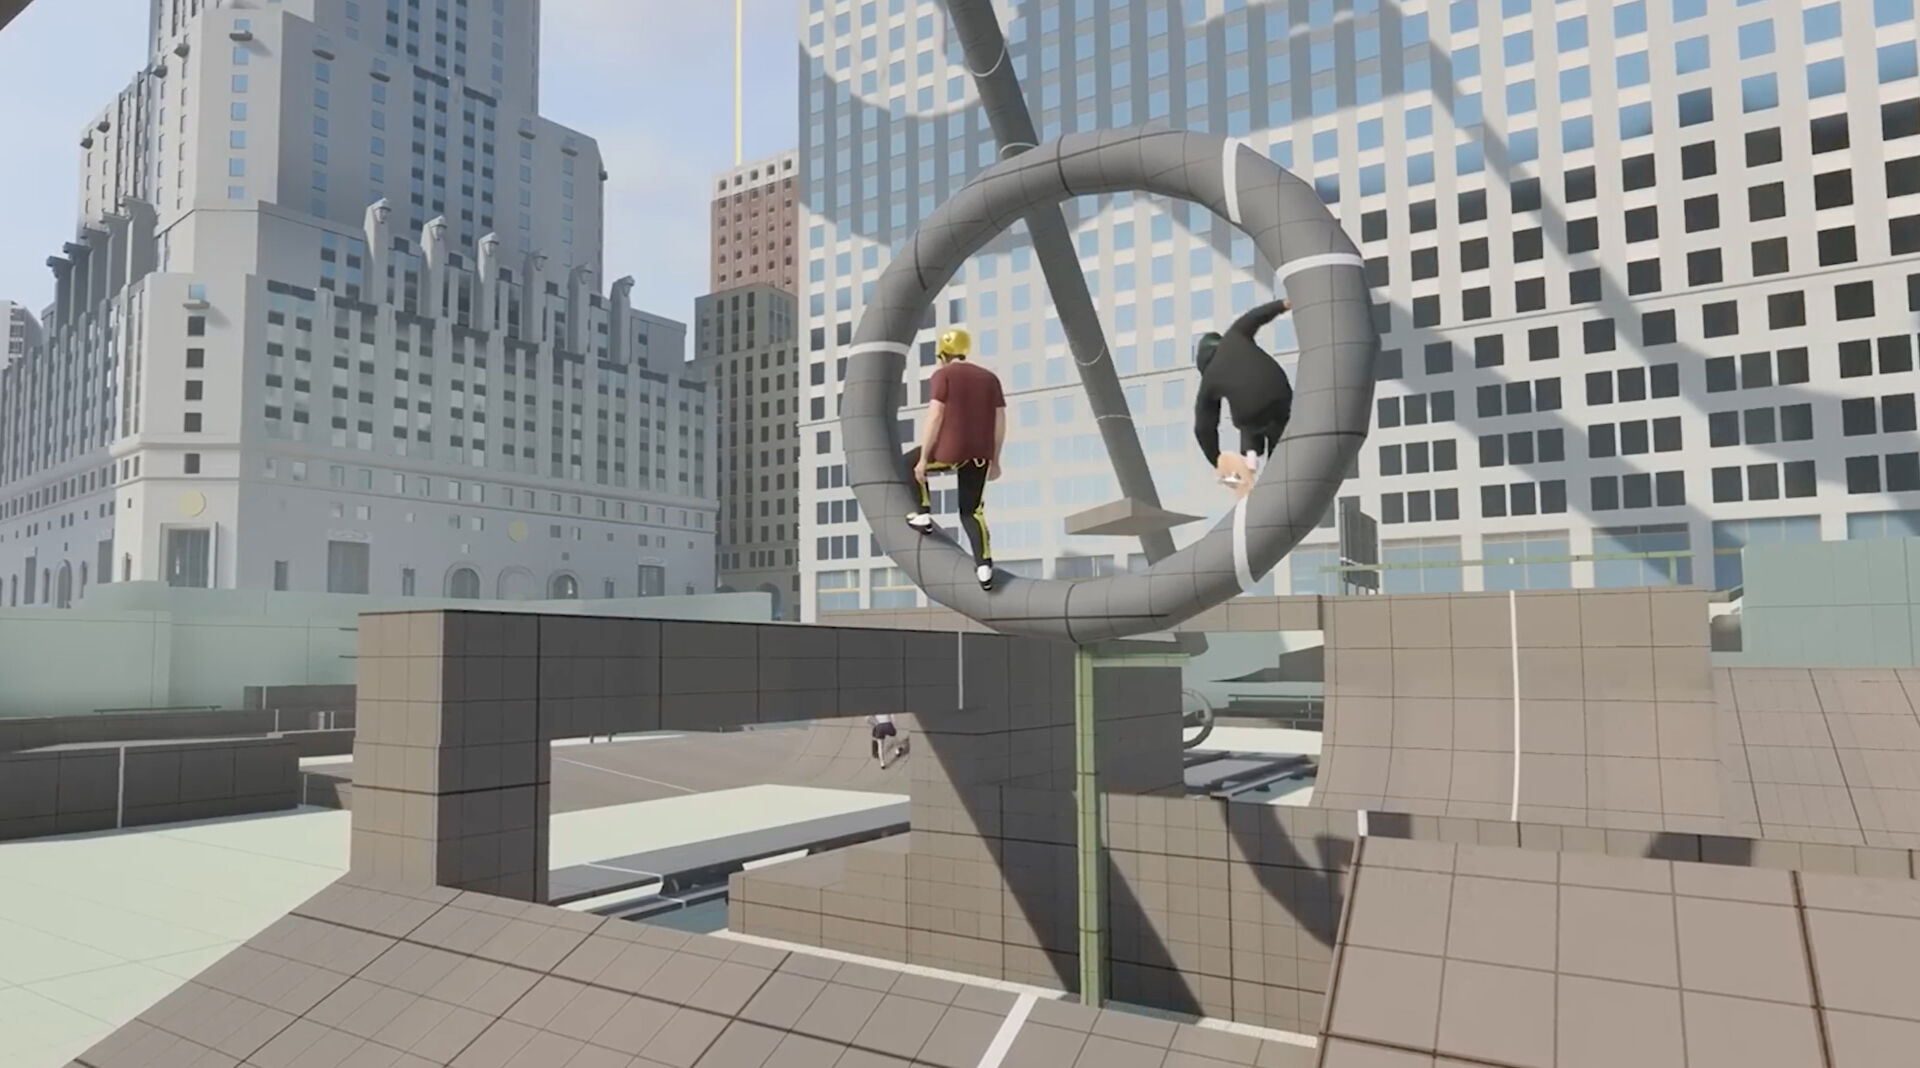 Skate's chaotic playtest videos are the best marketing the game could ask for